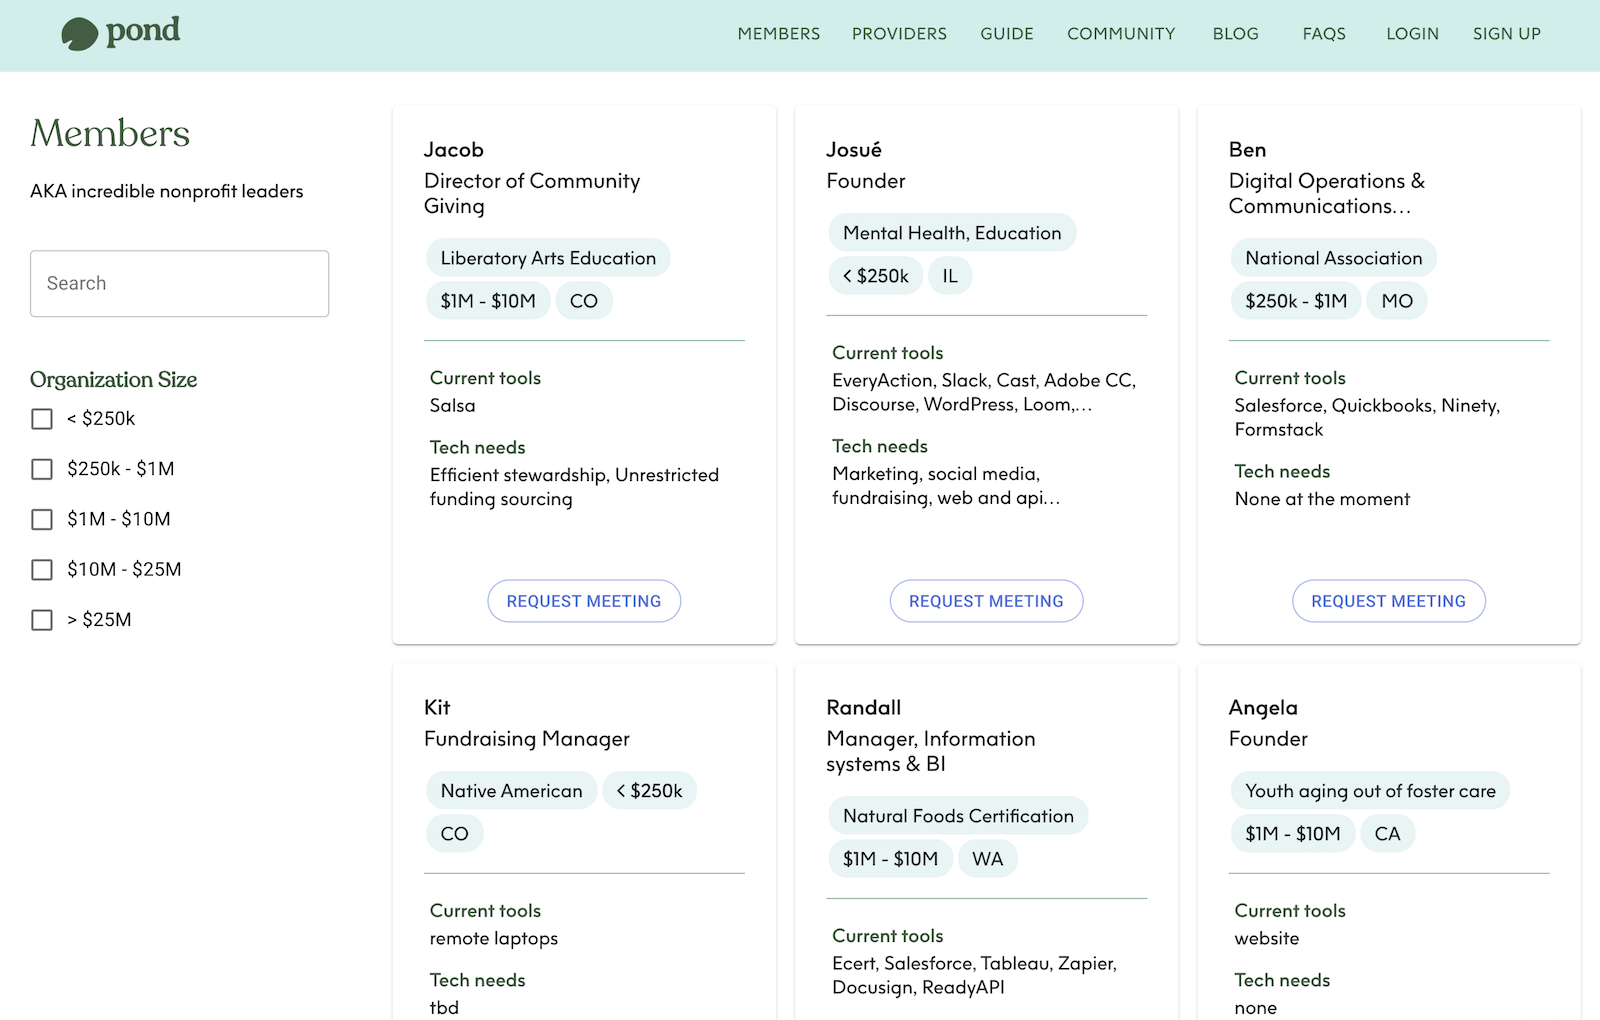 Pond allows nonprofits and tech providers to create free profiles on its site.